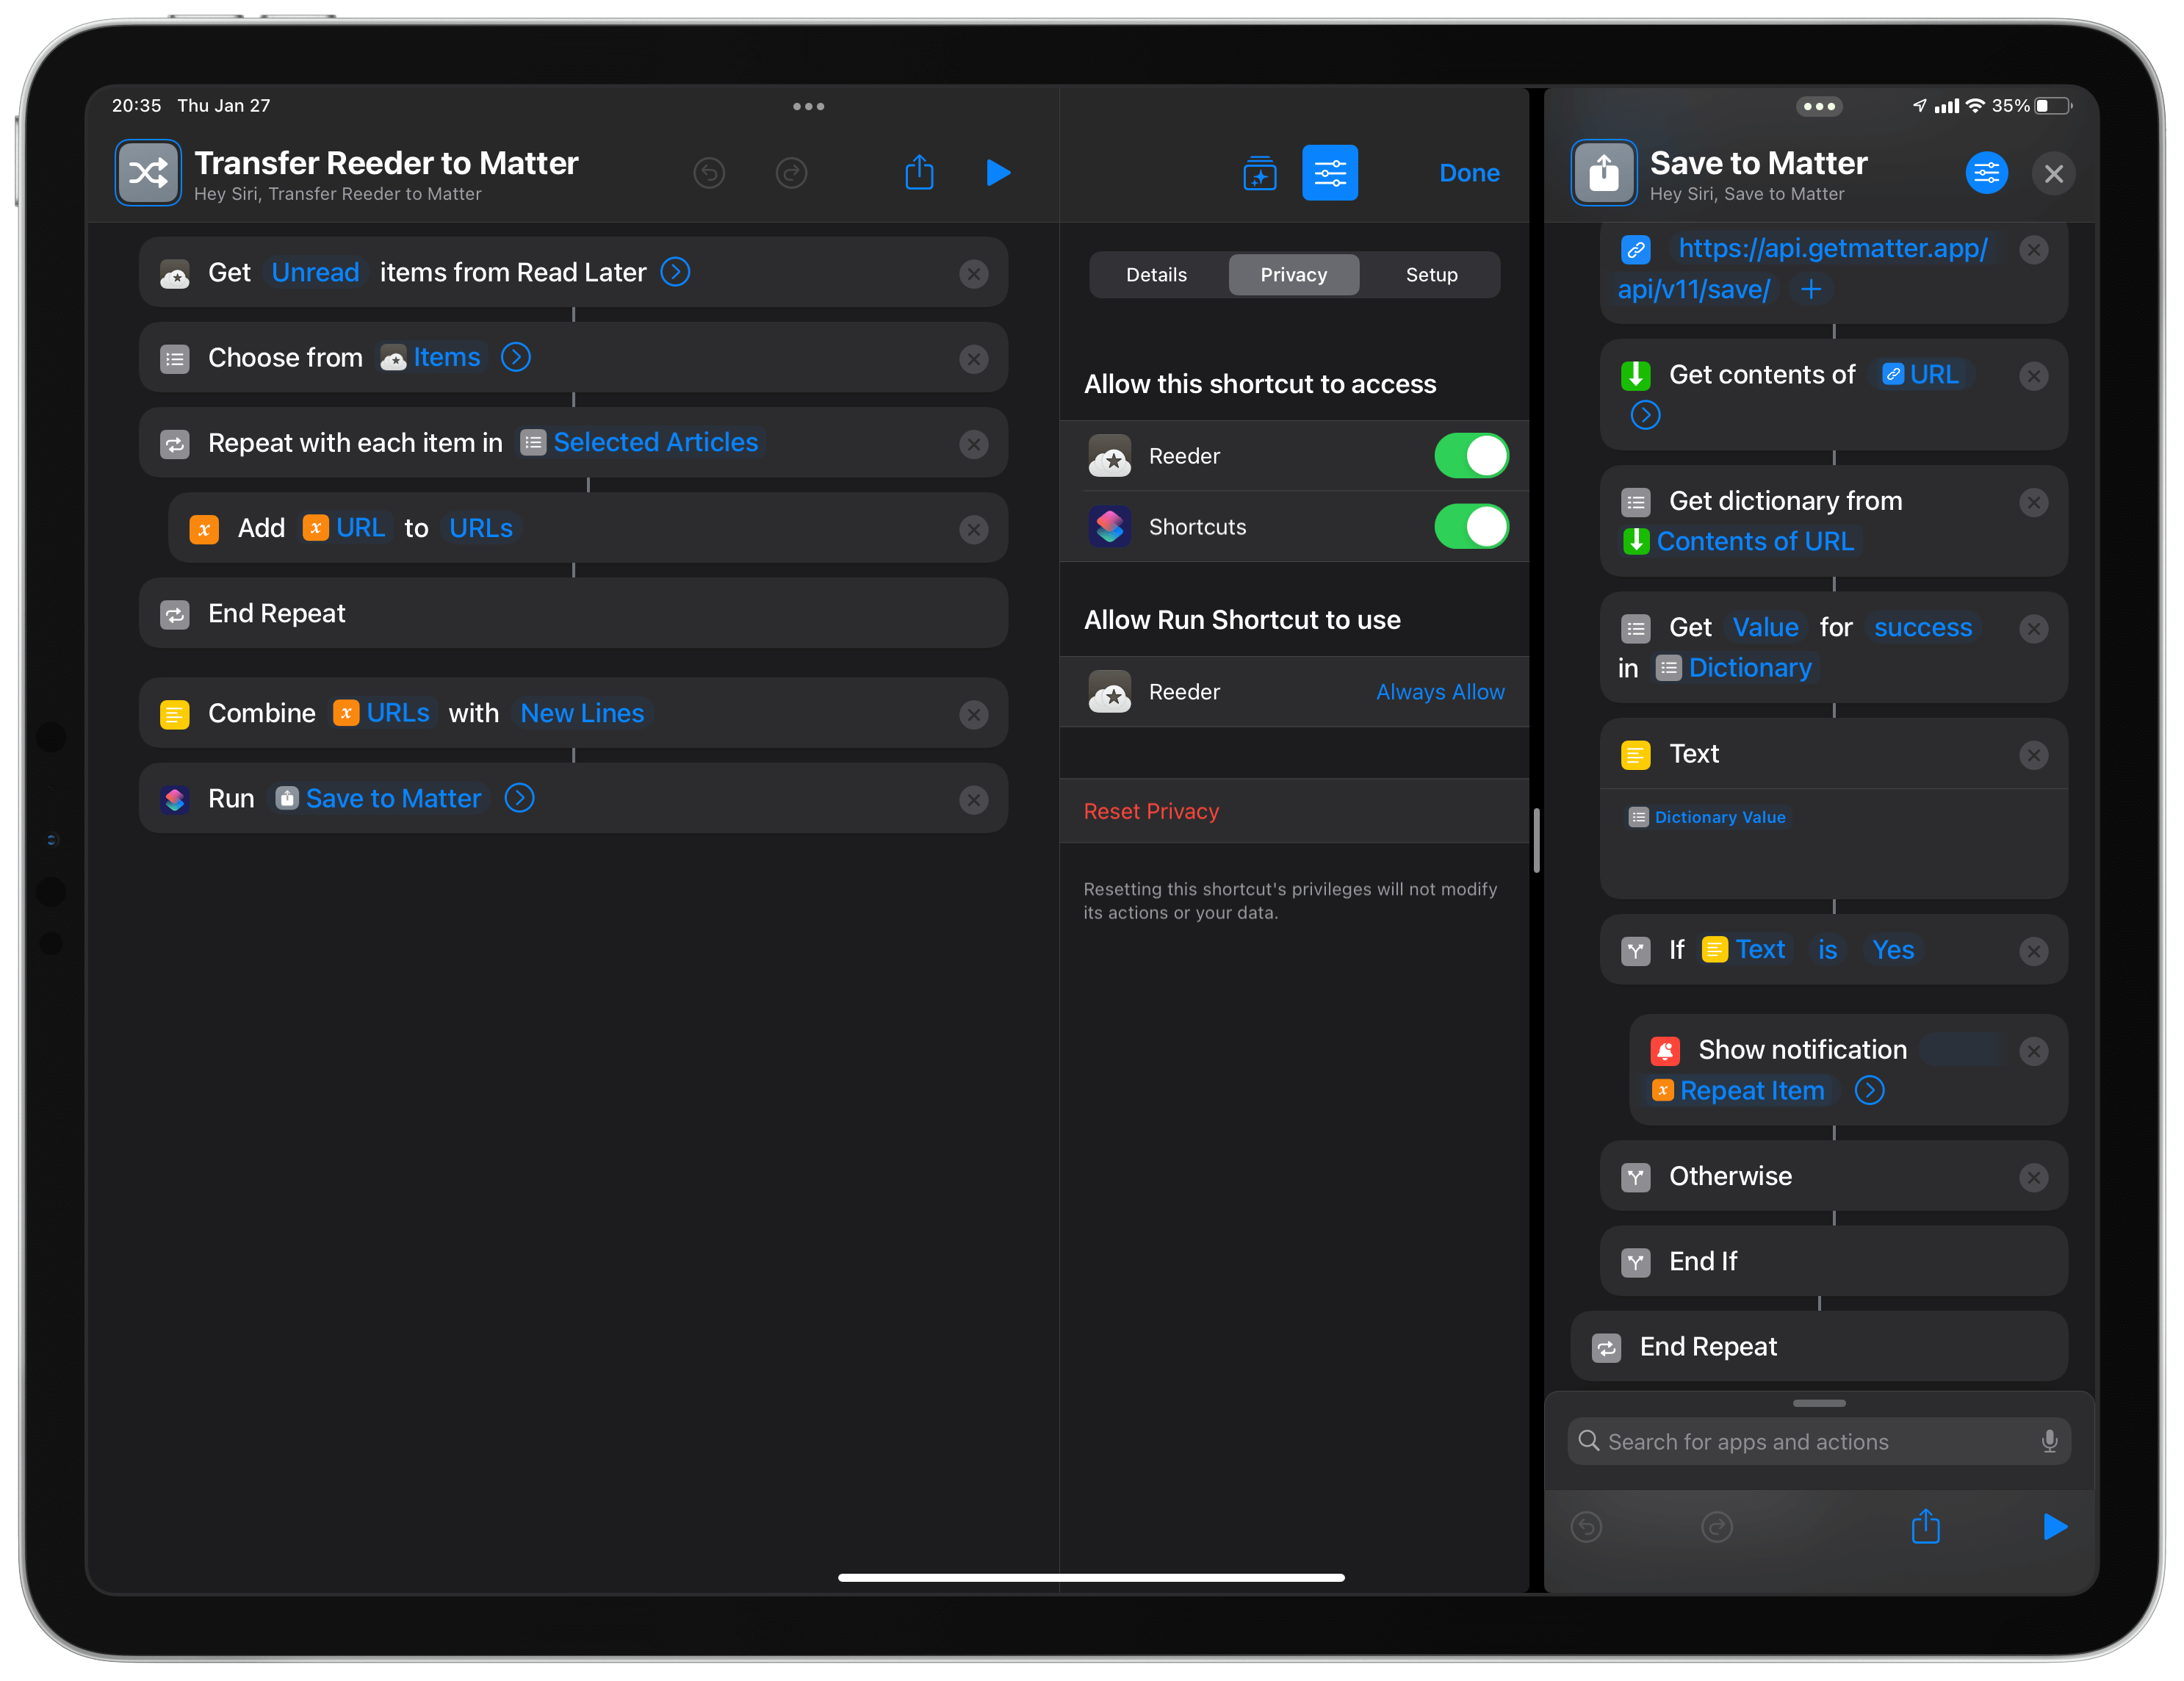 Screenshot of the two shortcuts side-by-side on an iPad Pro